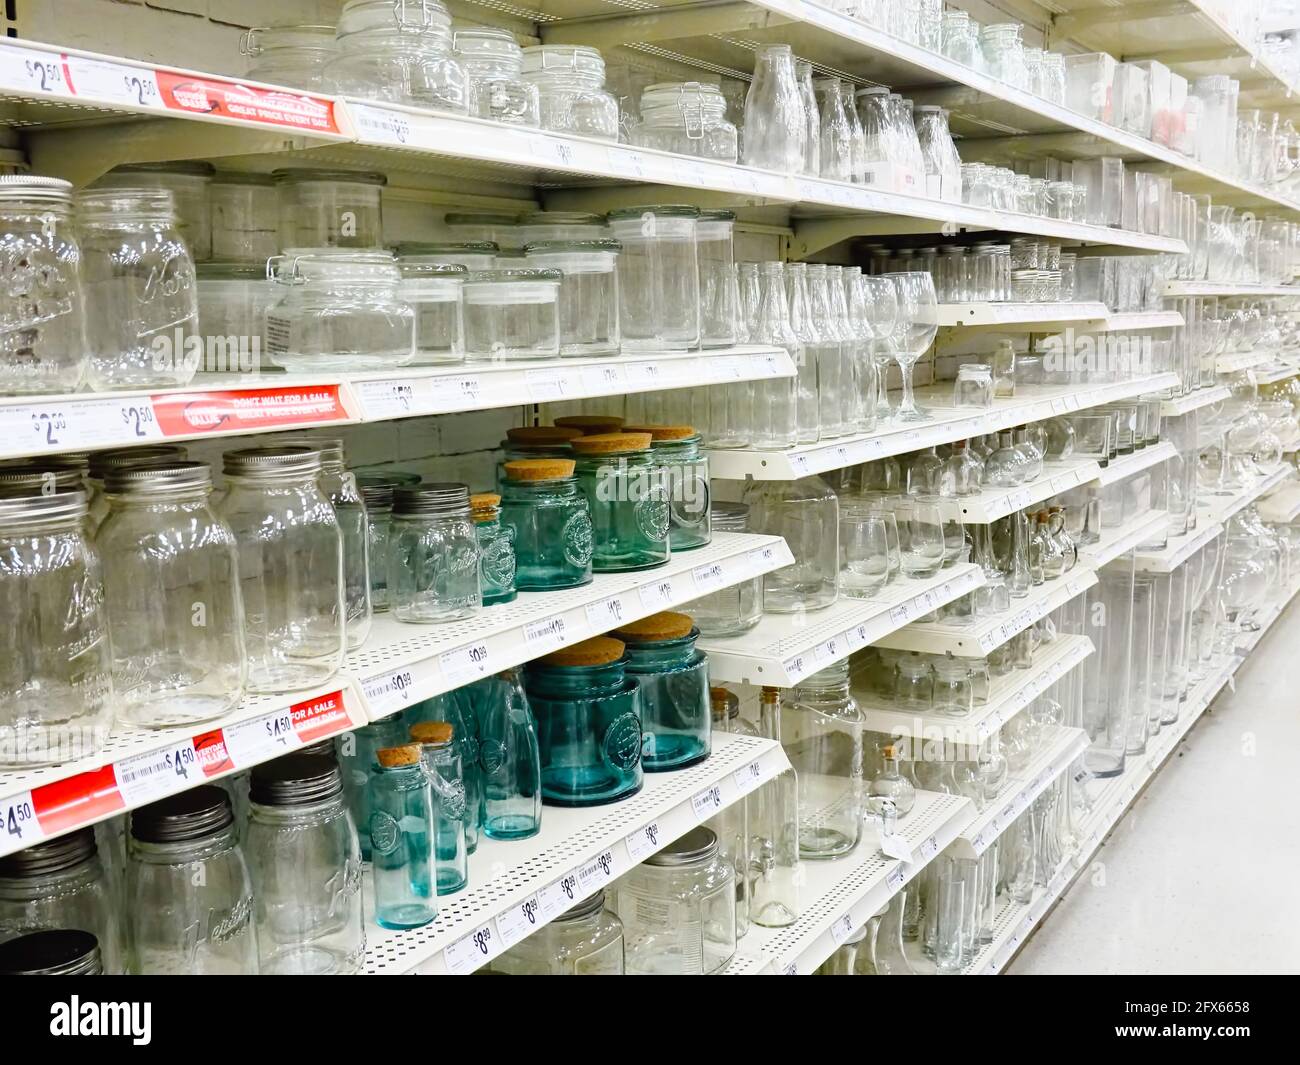 https://c8.alamy.com/comp/2FX6658/glass-containers-for-sale-lining-shelves-in-a-retail-store-maple-ridge-b-c-canada-2FX6658.jpg